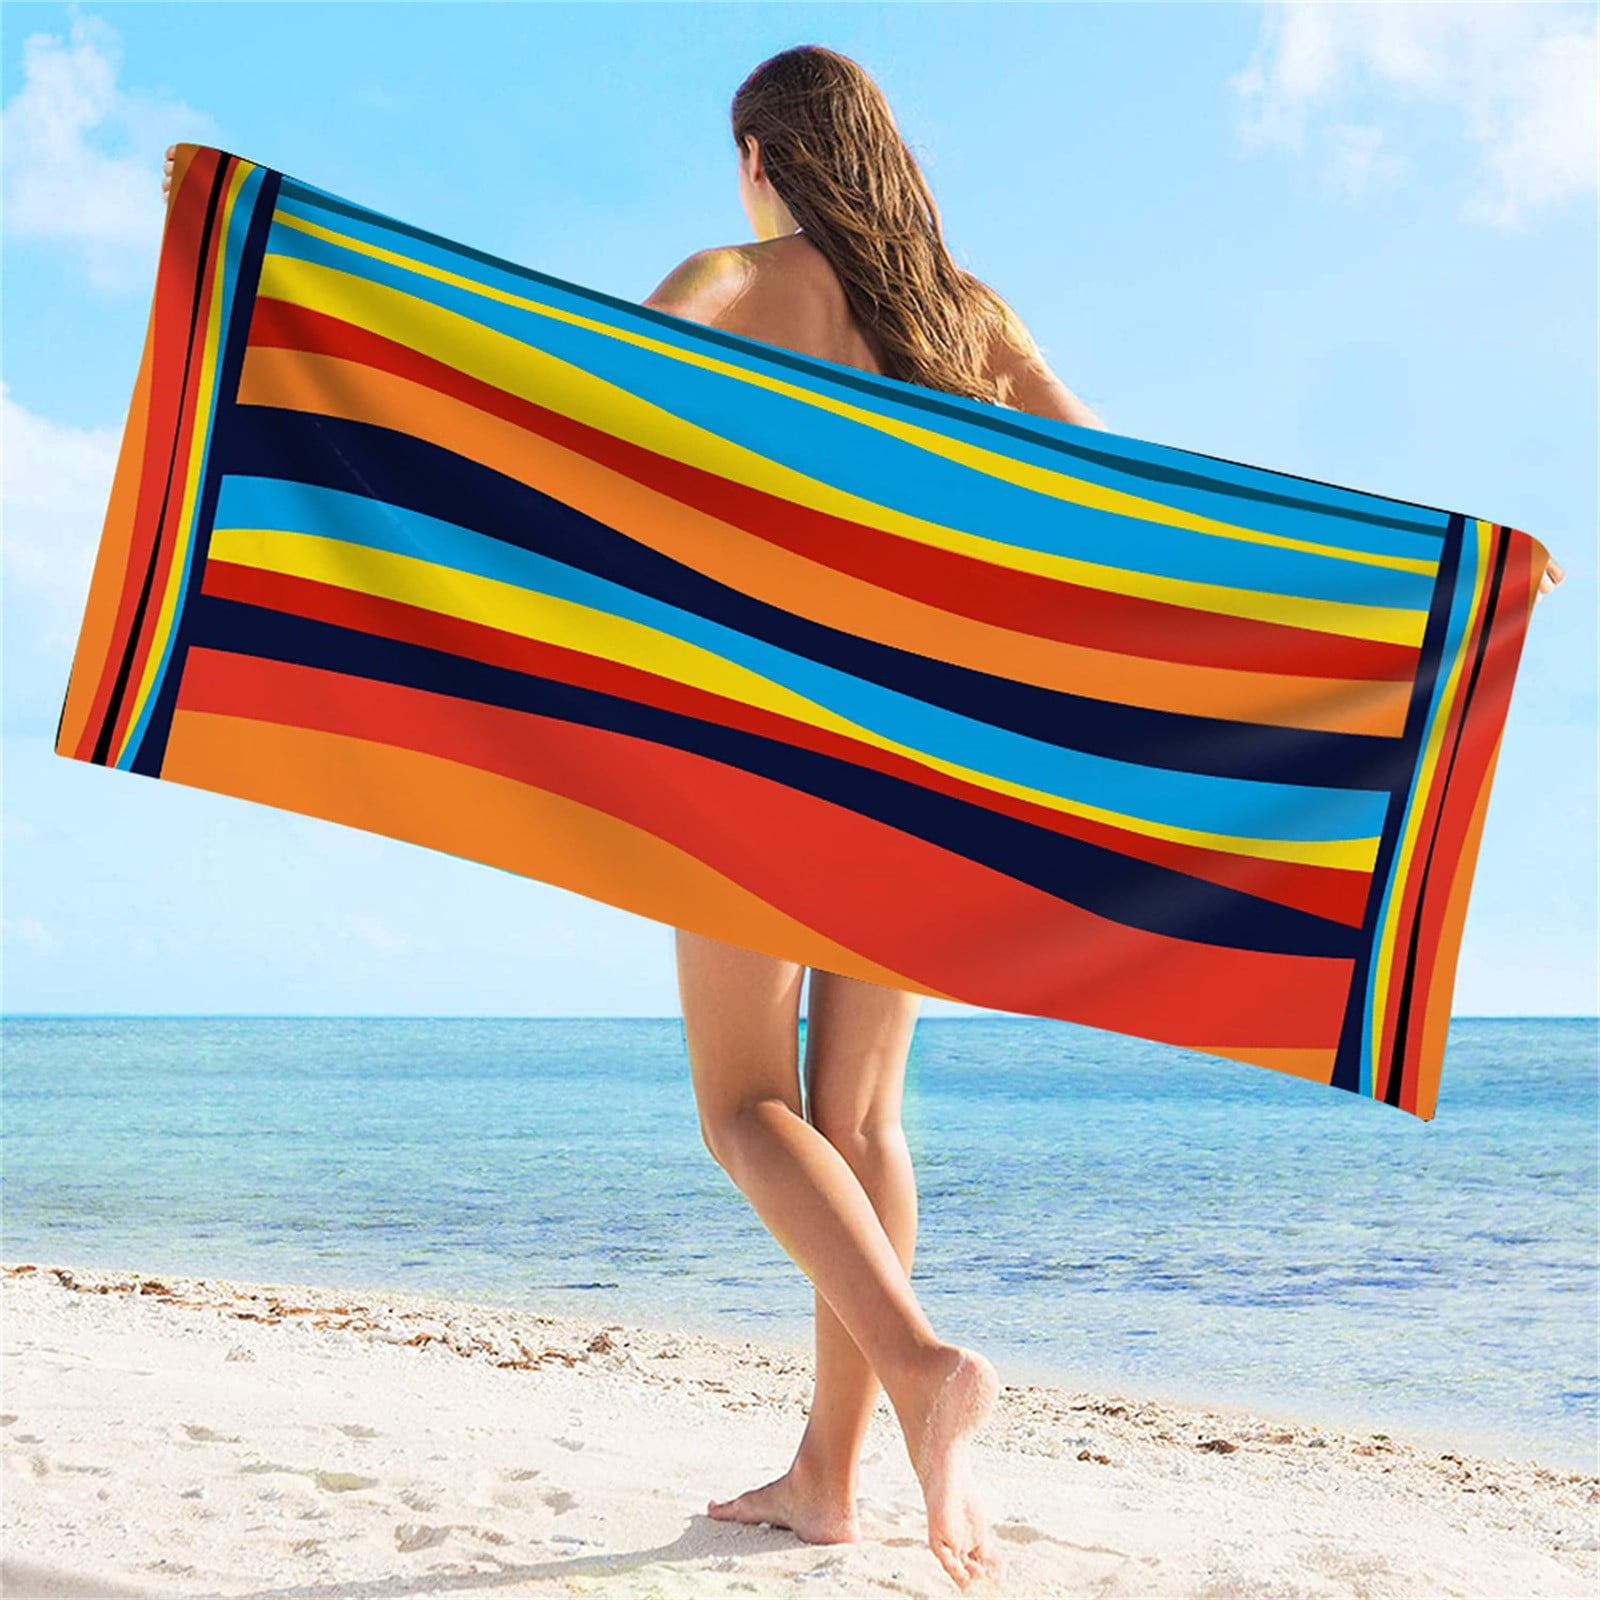 RKSTN Bath Towels Quick Dry Sand Free Compact Lightweight Colorful ...